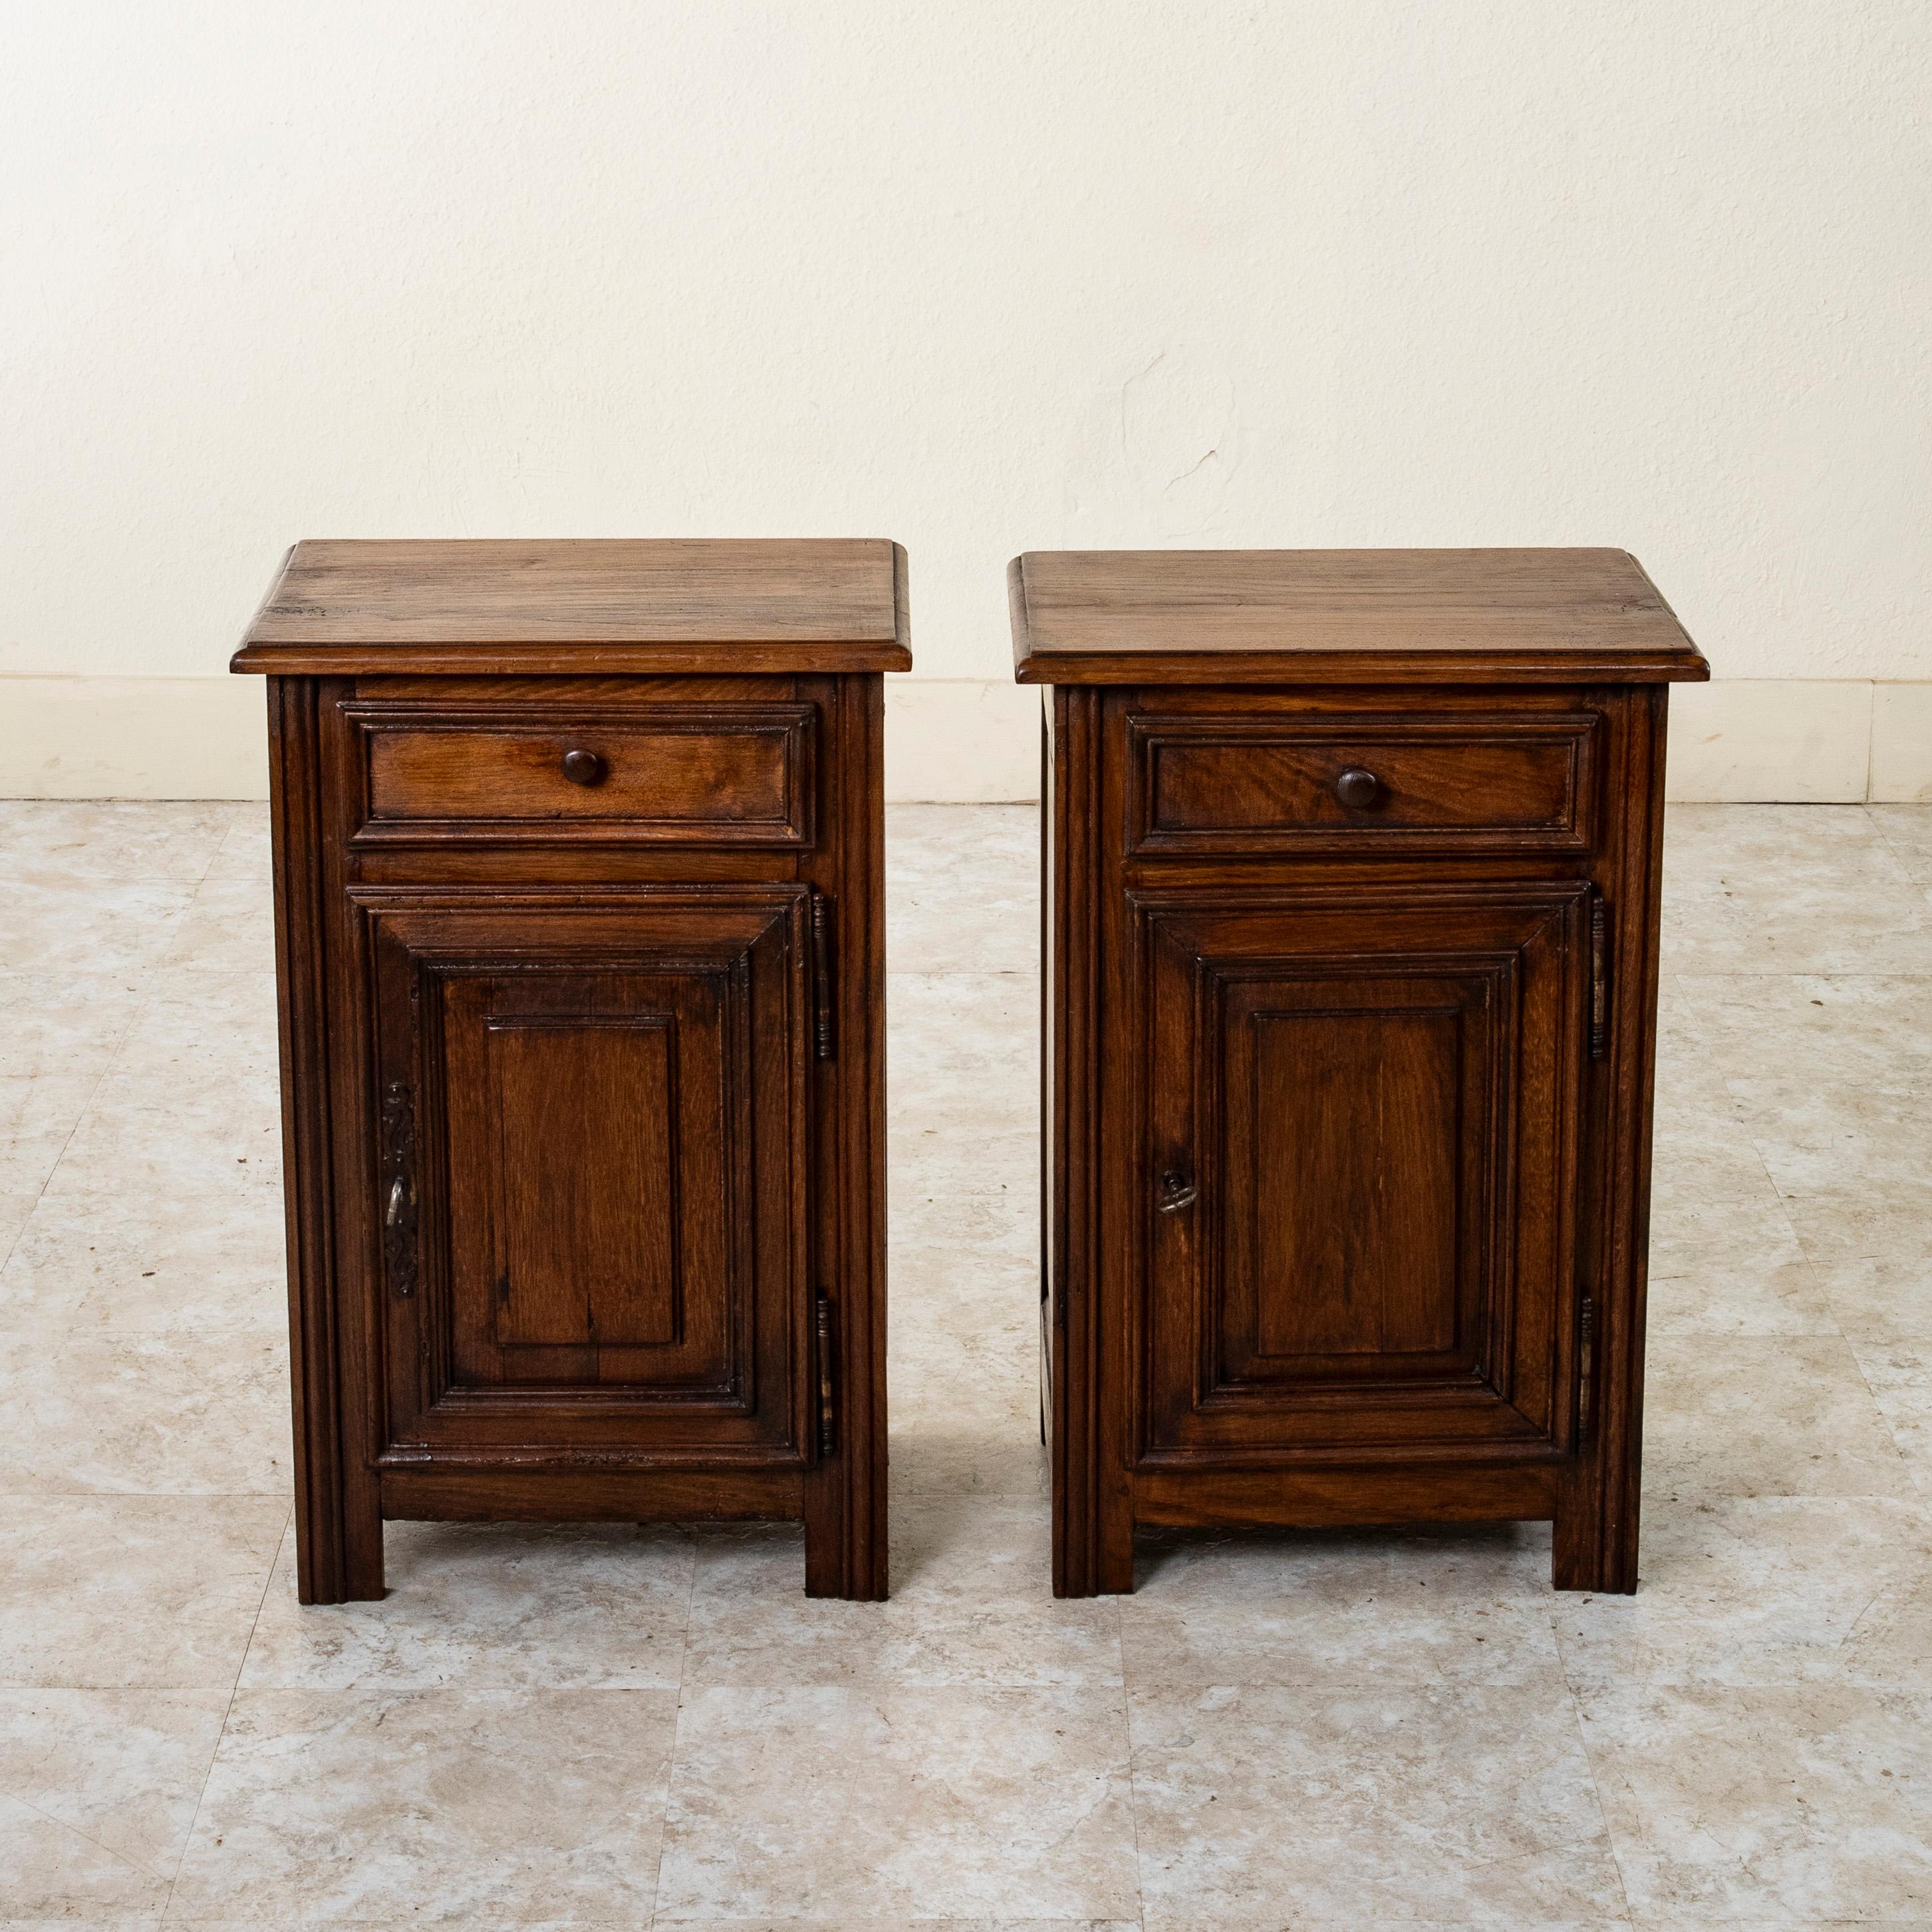 Found in the region of Normandy, France, this pair of early twentieth century rustic oak nightstands or bedside cabinets features solid hand pegged paneled sides in the Louis XIV style. Each cabinet is fitted with a single drawer above and a lower